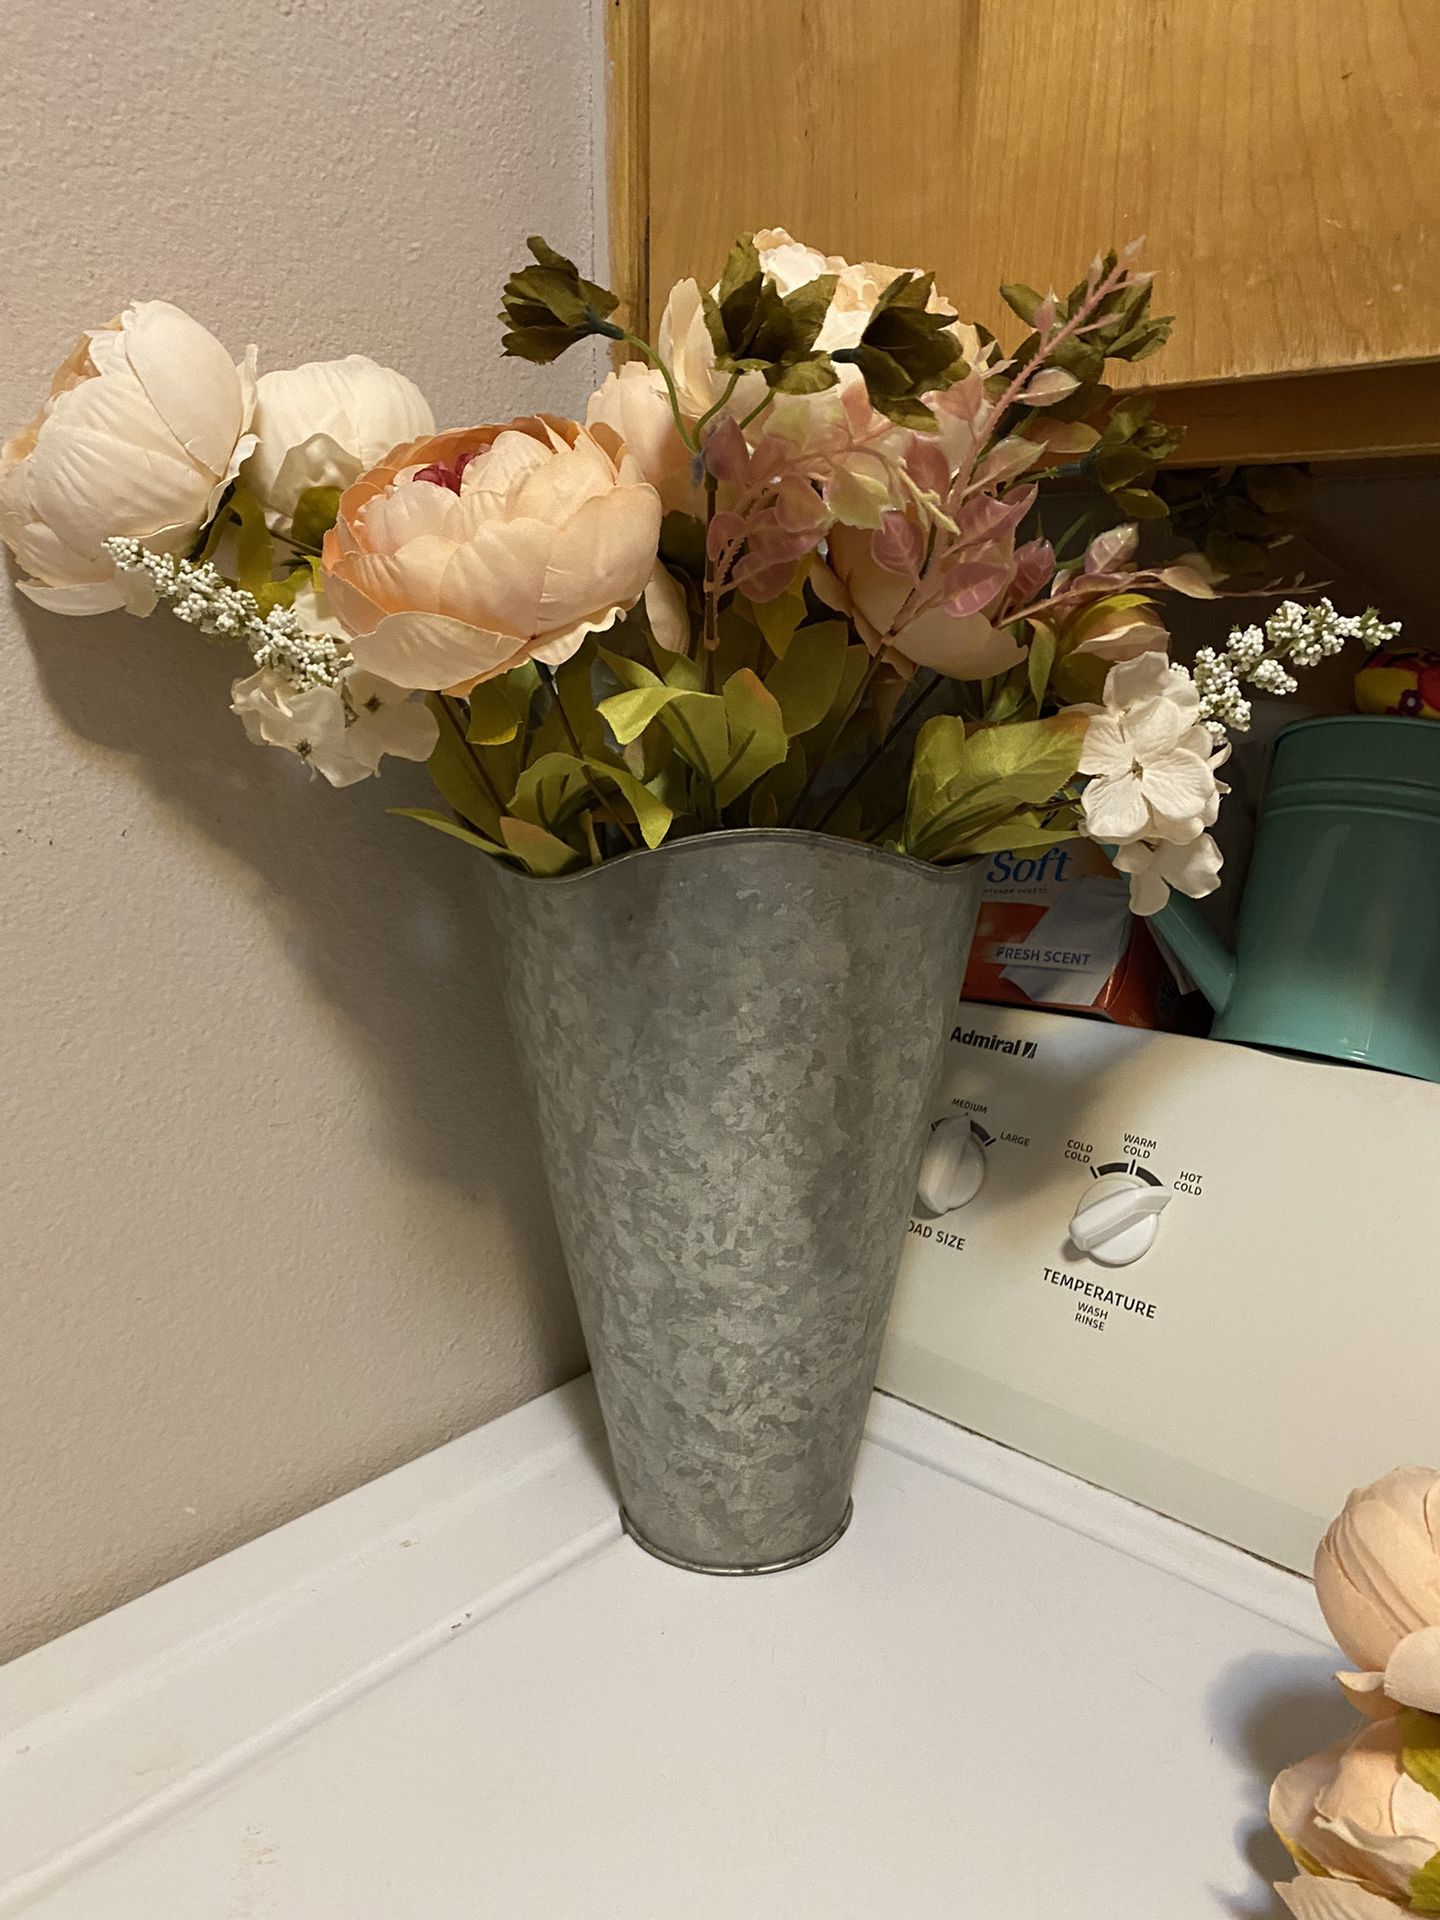 Galvanized Metal Vases For The Wall With Flowers